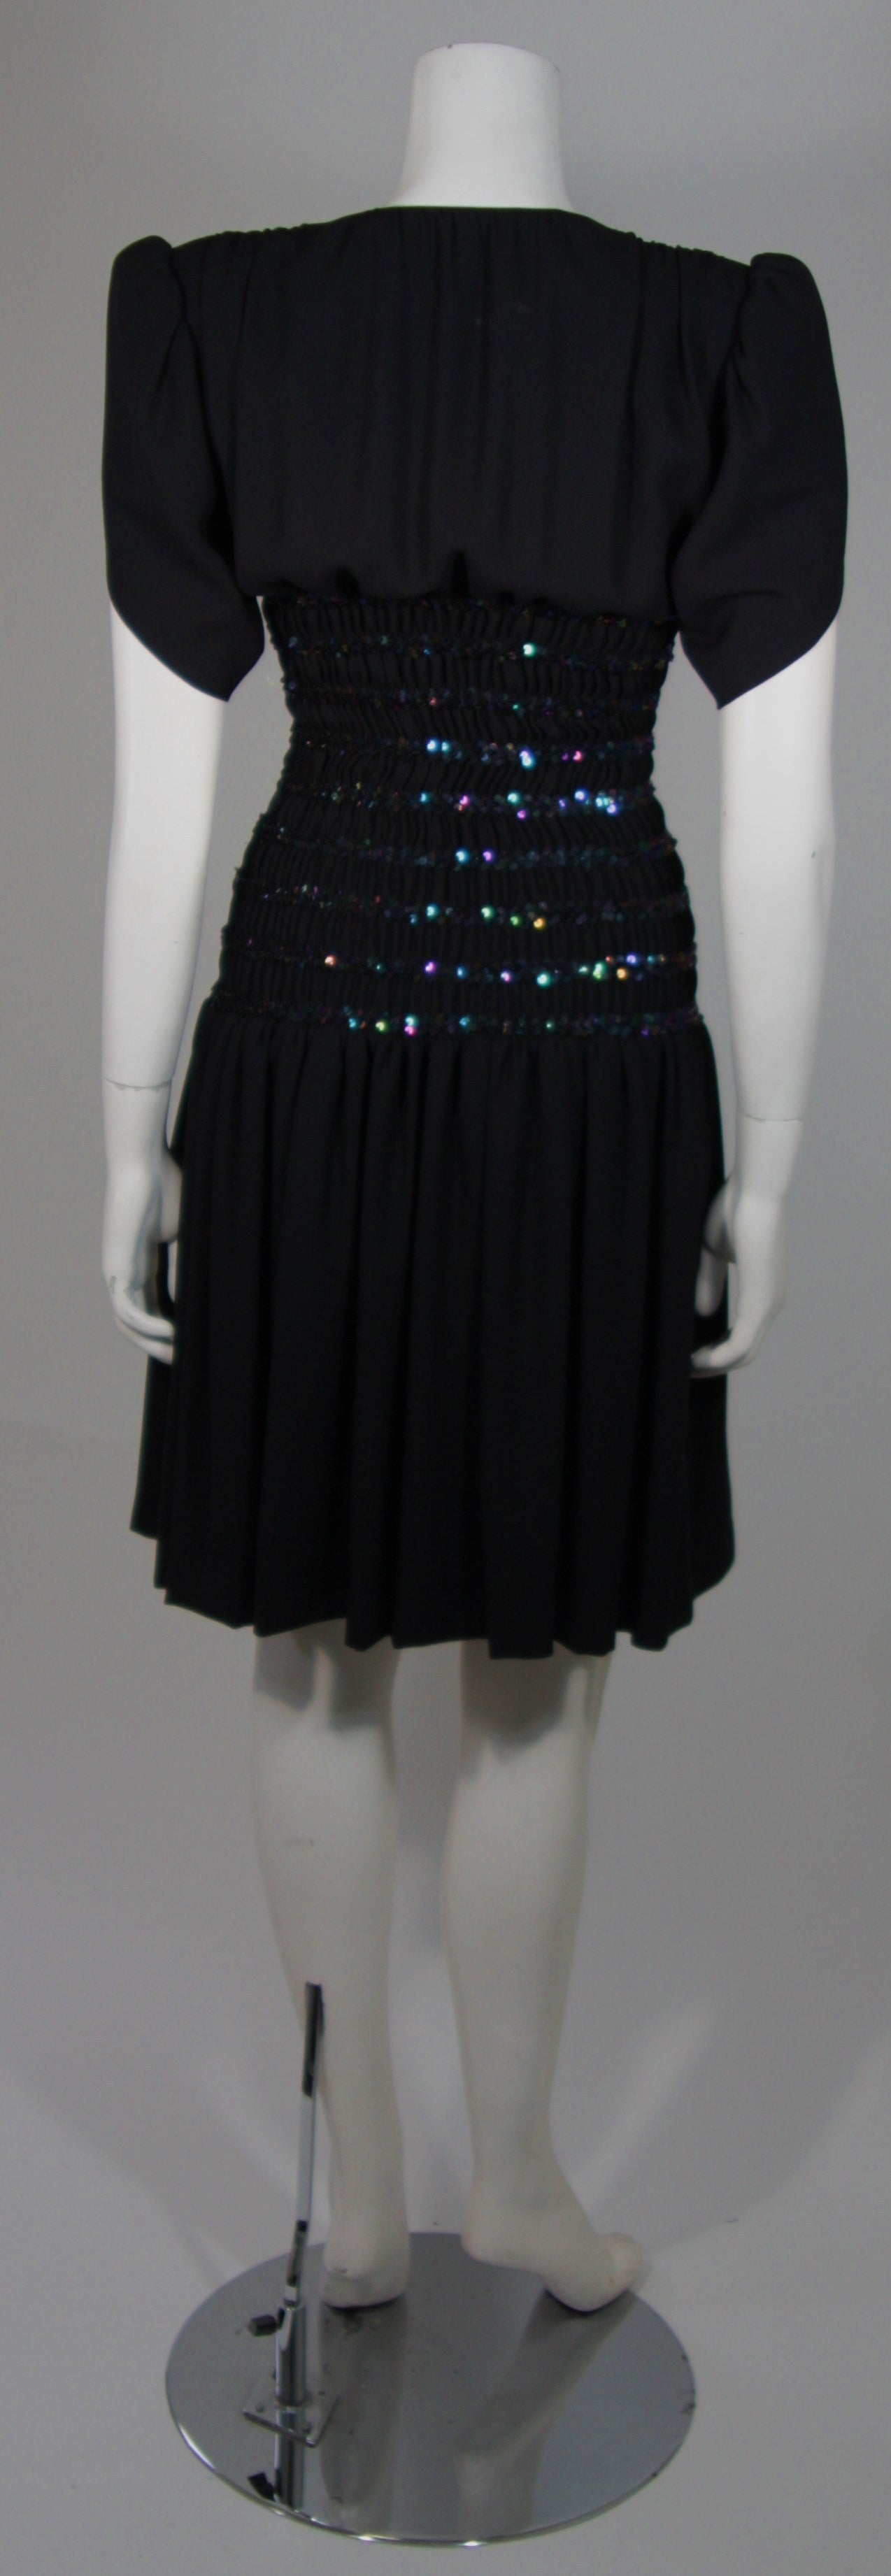 Yves Saint Laurent Black Cocktail Gown with Sequin Smocked Waist Size 38 For Sale 4